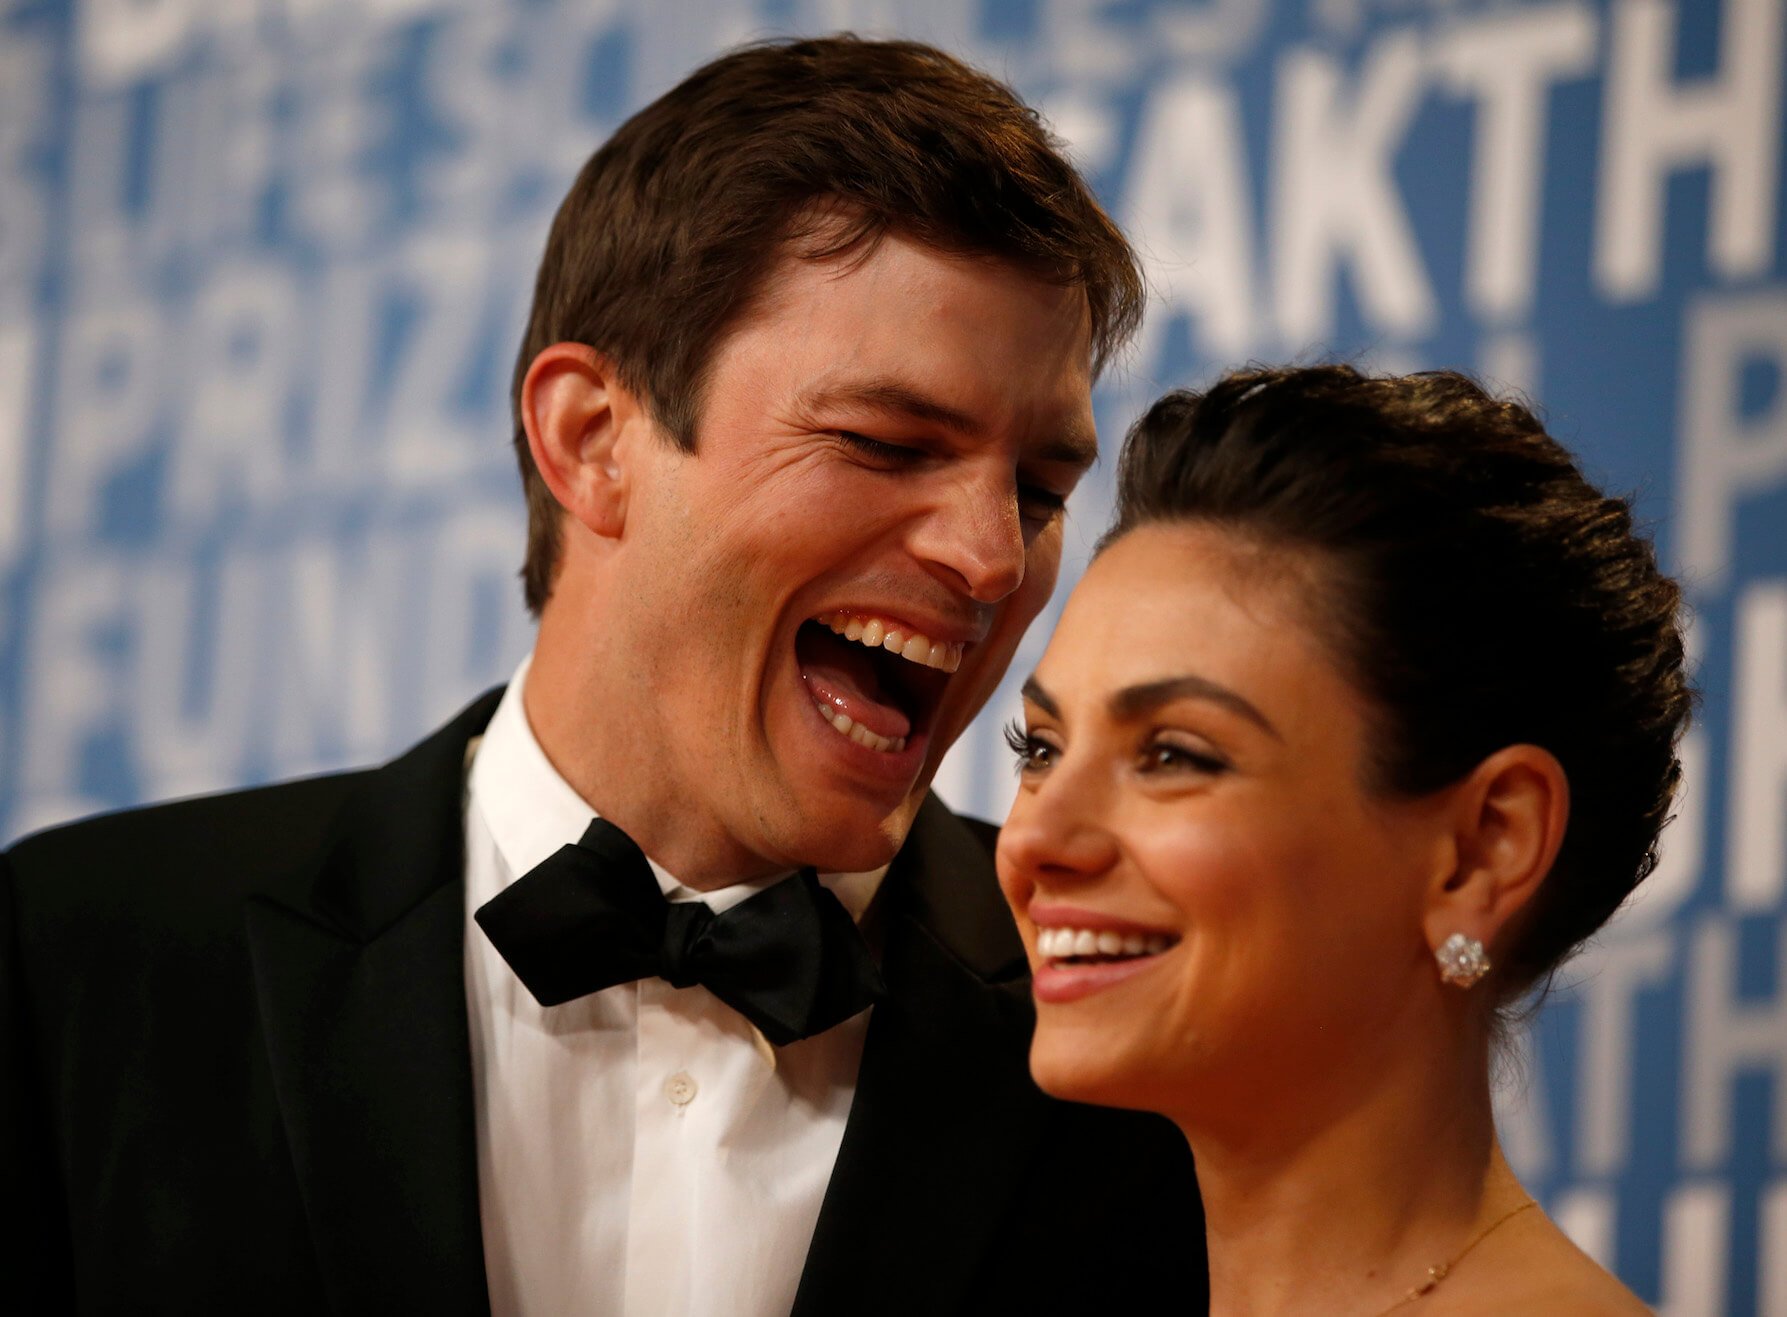 Ashton Kutcher making a funny face at Mila Kunis at an event. They are the parents of two children, Wyatt Isabelle and Dimitri Portwood